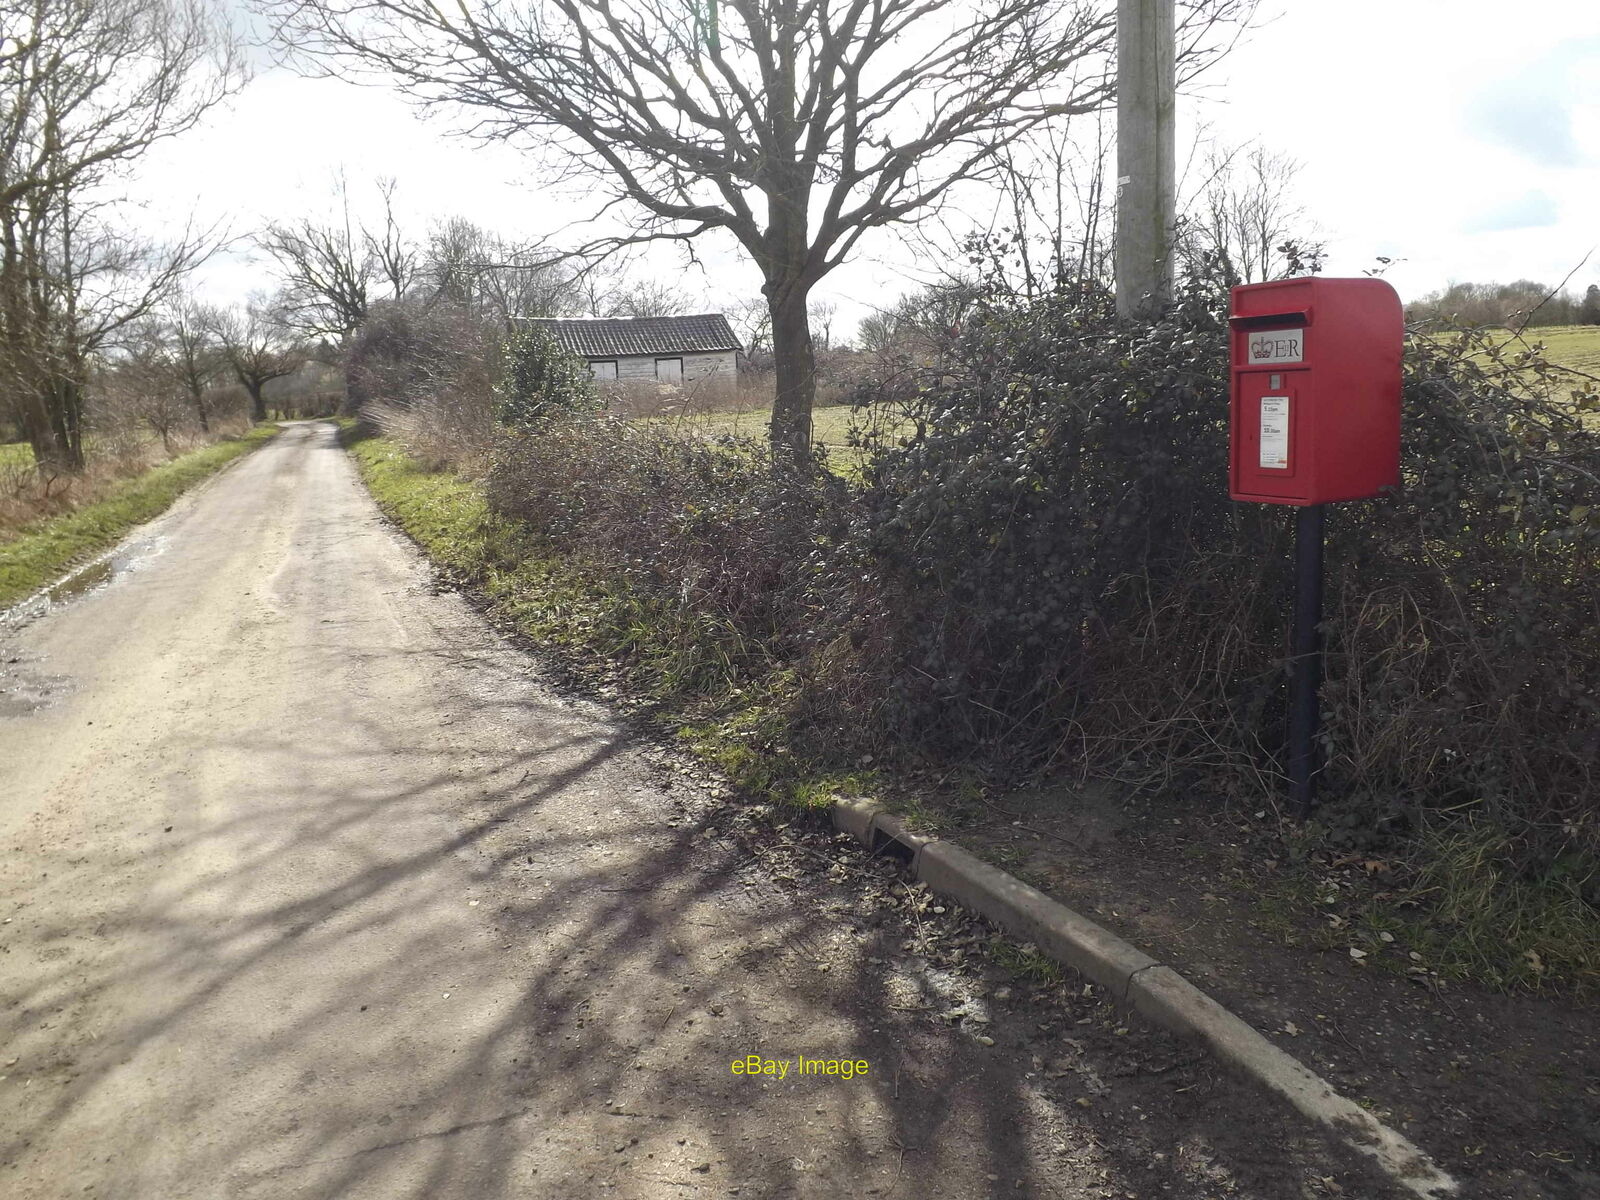 Photo 12x8 New Road & Great Green Postbox 2 c2015